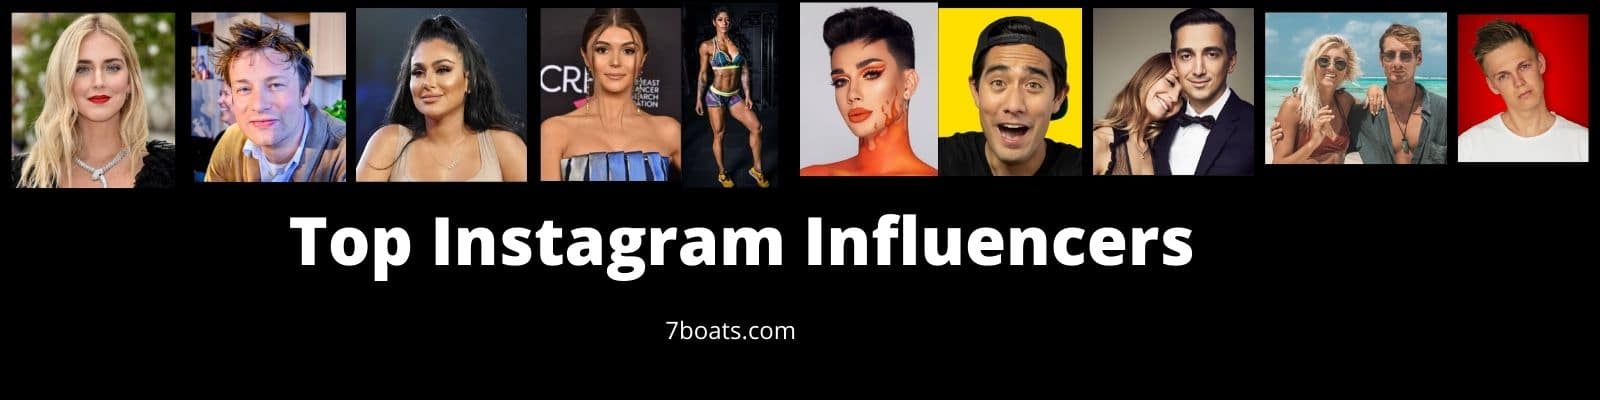 Top 10 Instagram influencers you should follow in 2021